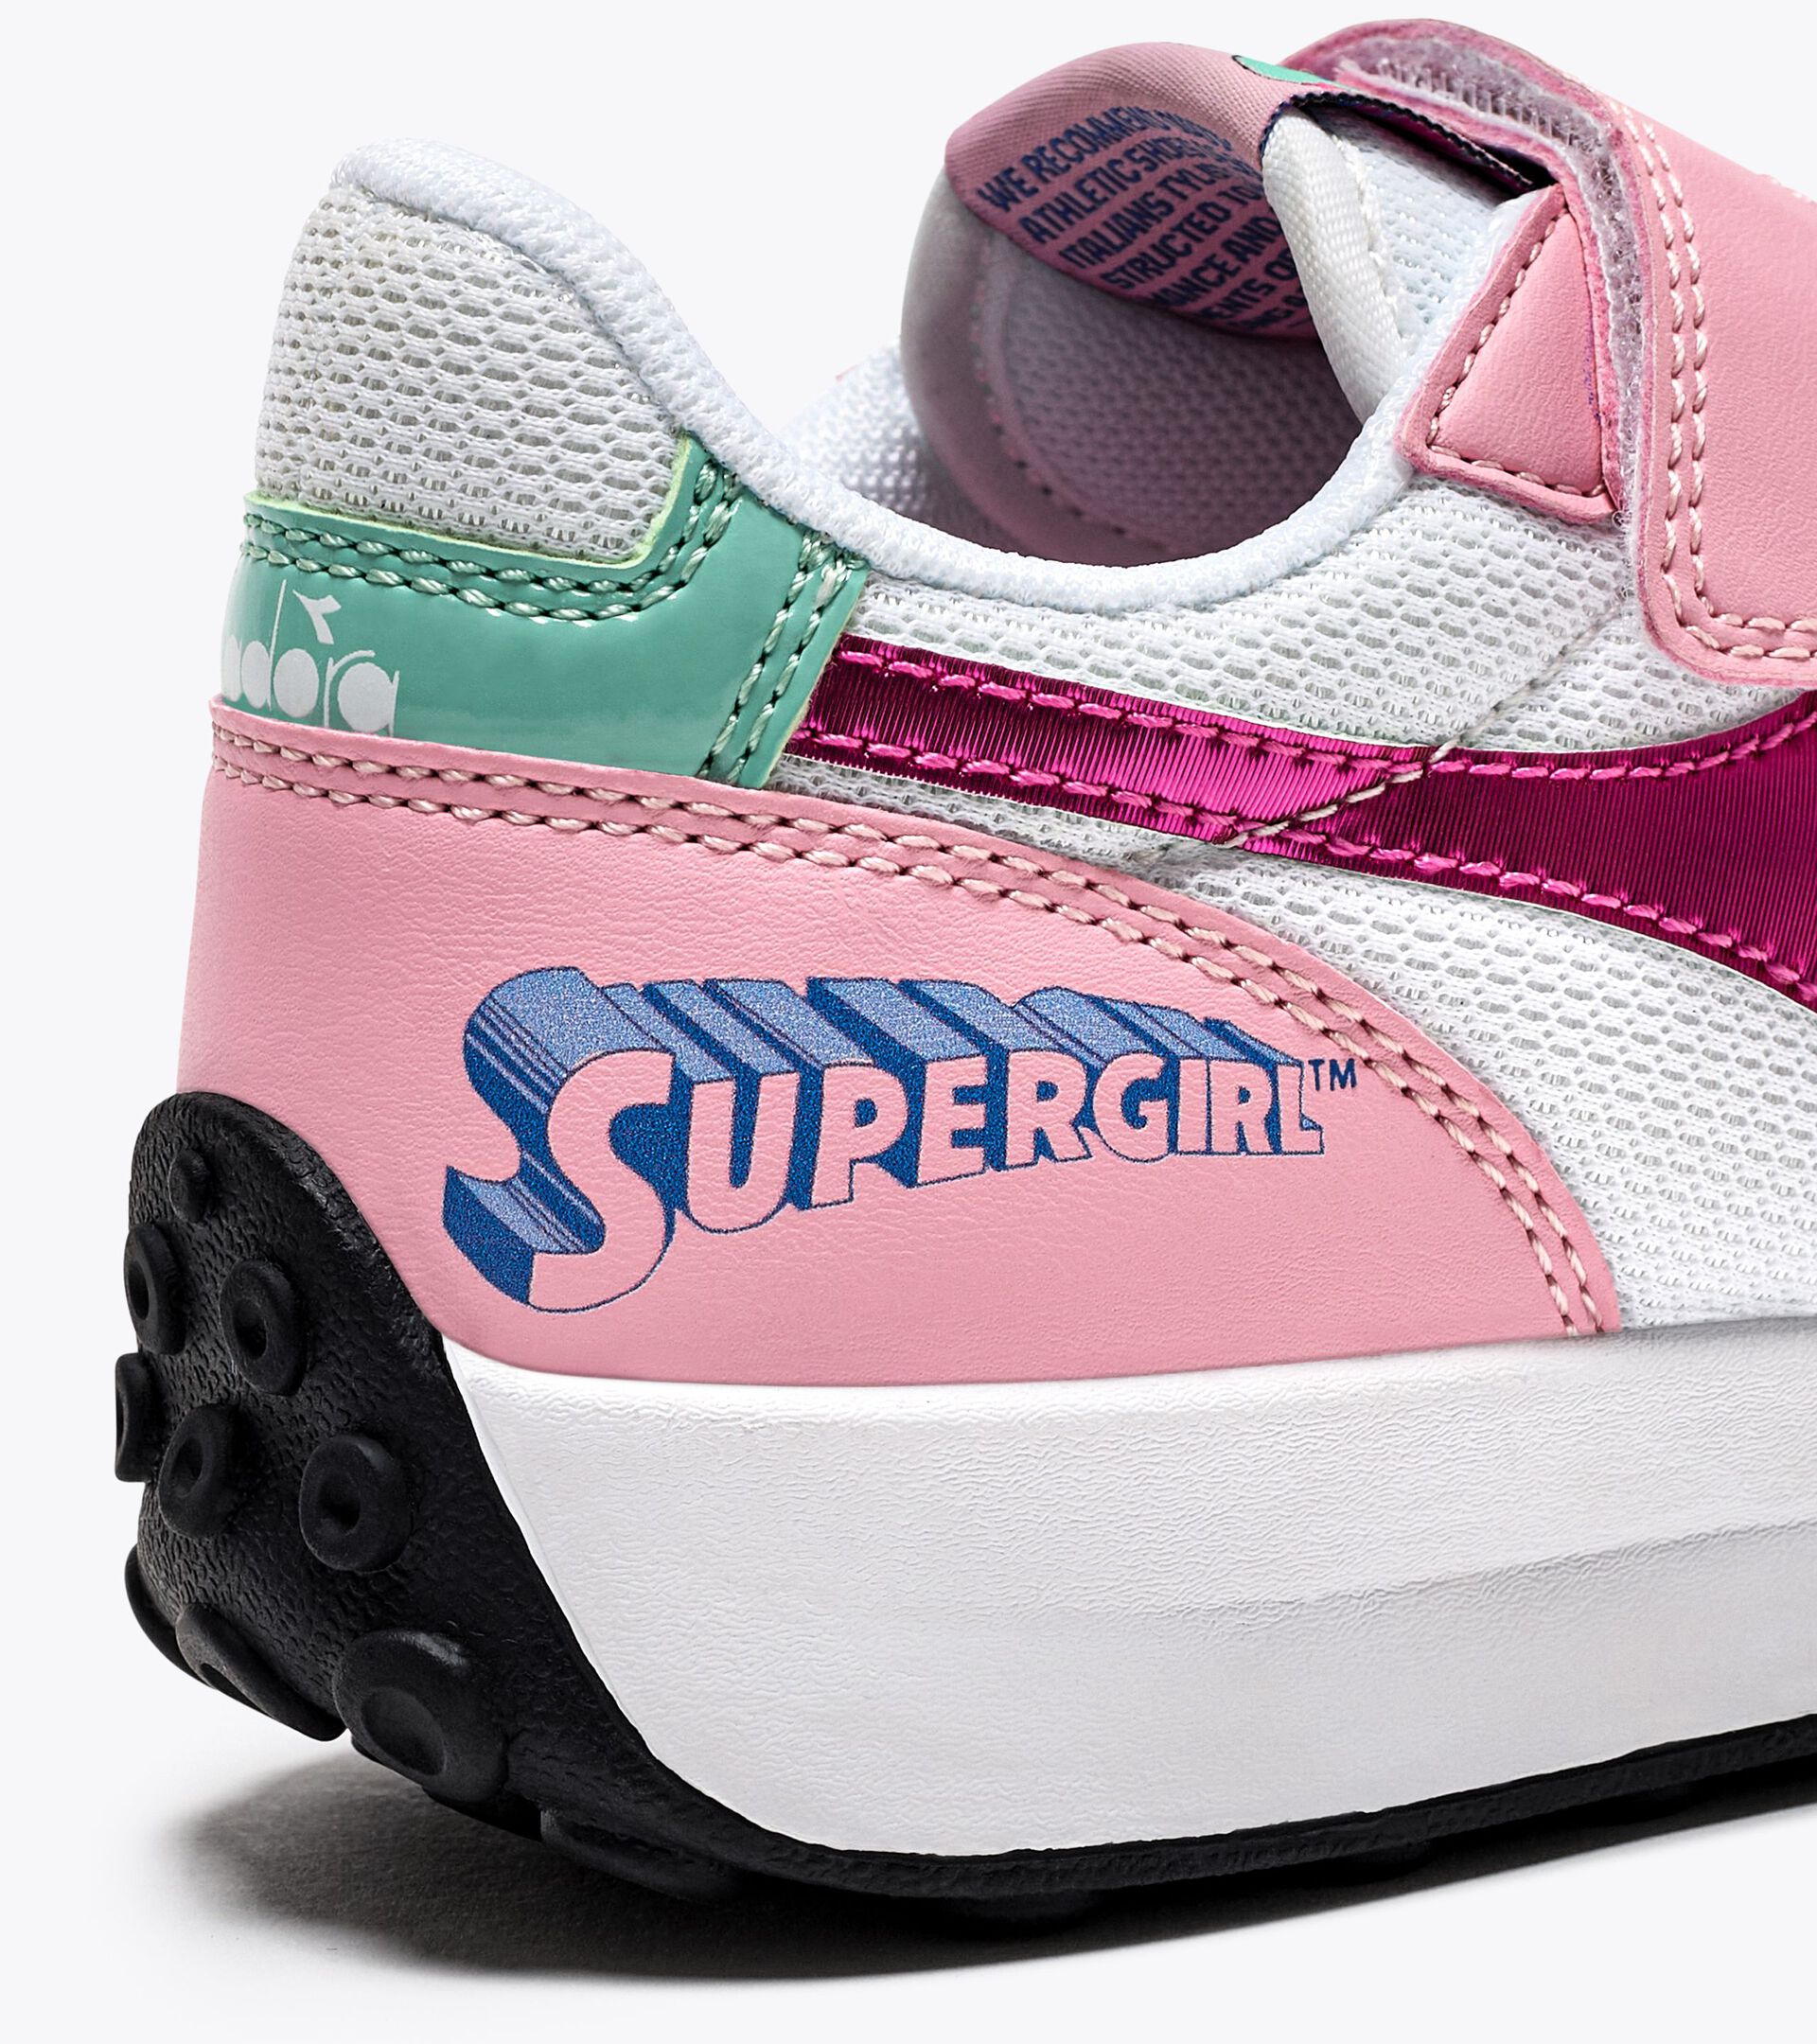 Sports sneaker - Girls - 4 to 8 years old  RACE PS SUPERGIRL CANDY PINK/HOT PINK - Diadora